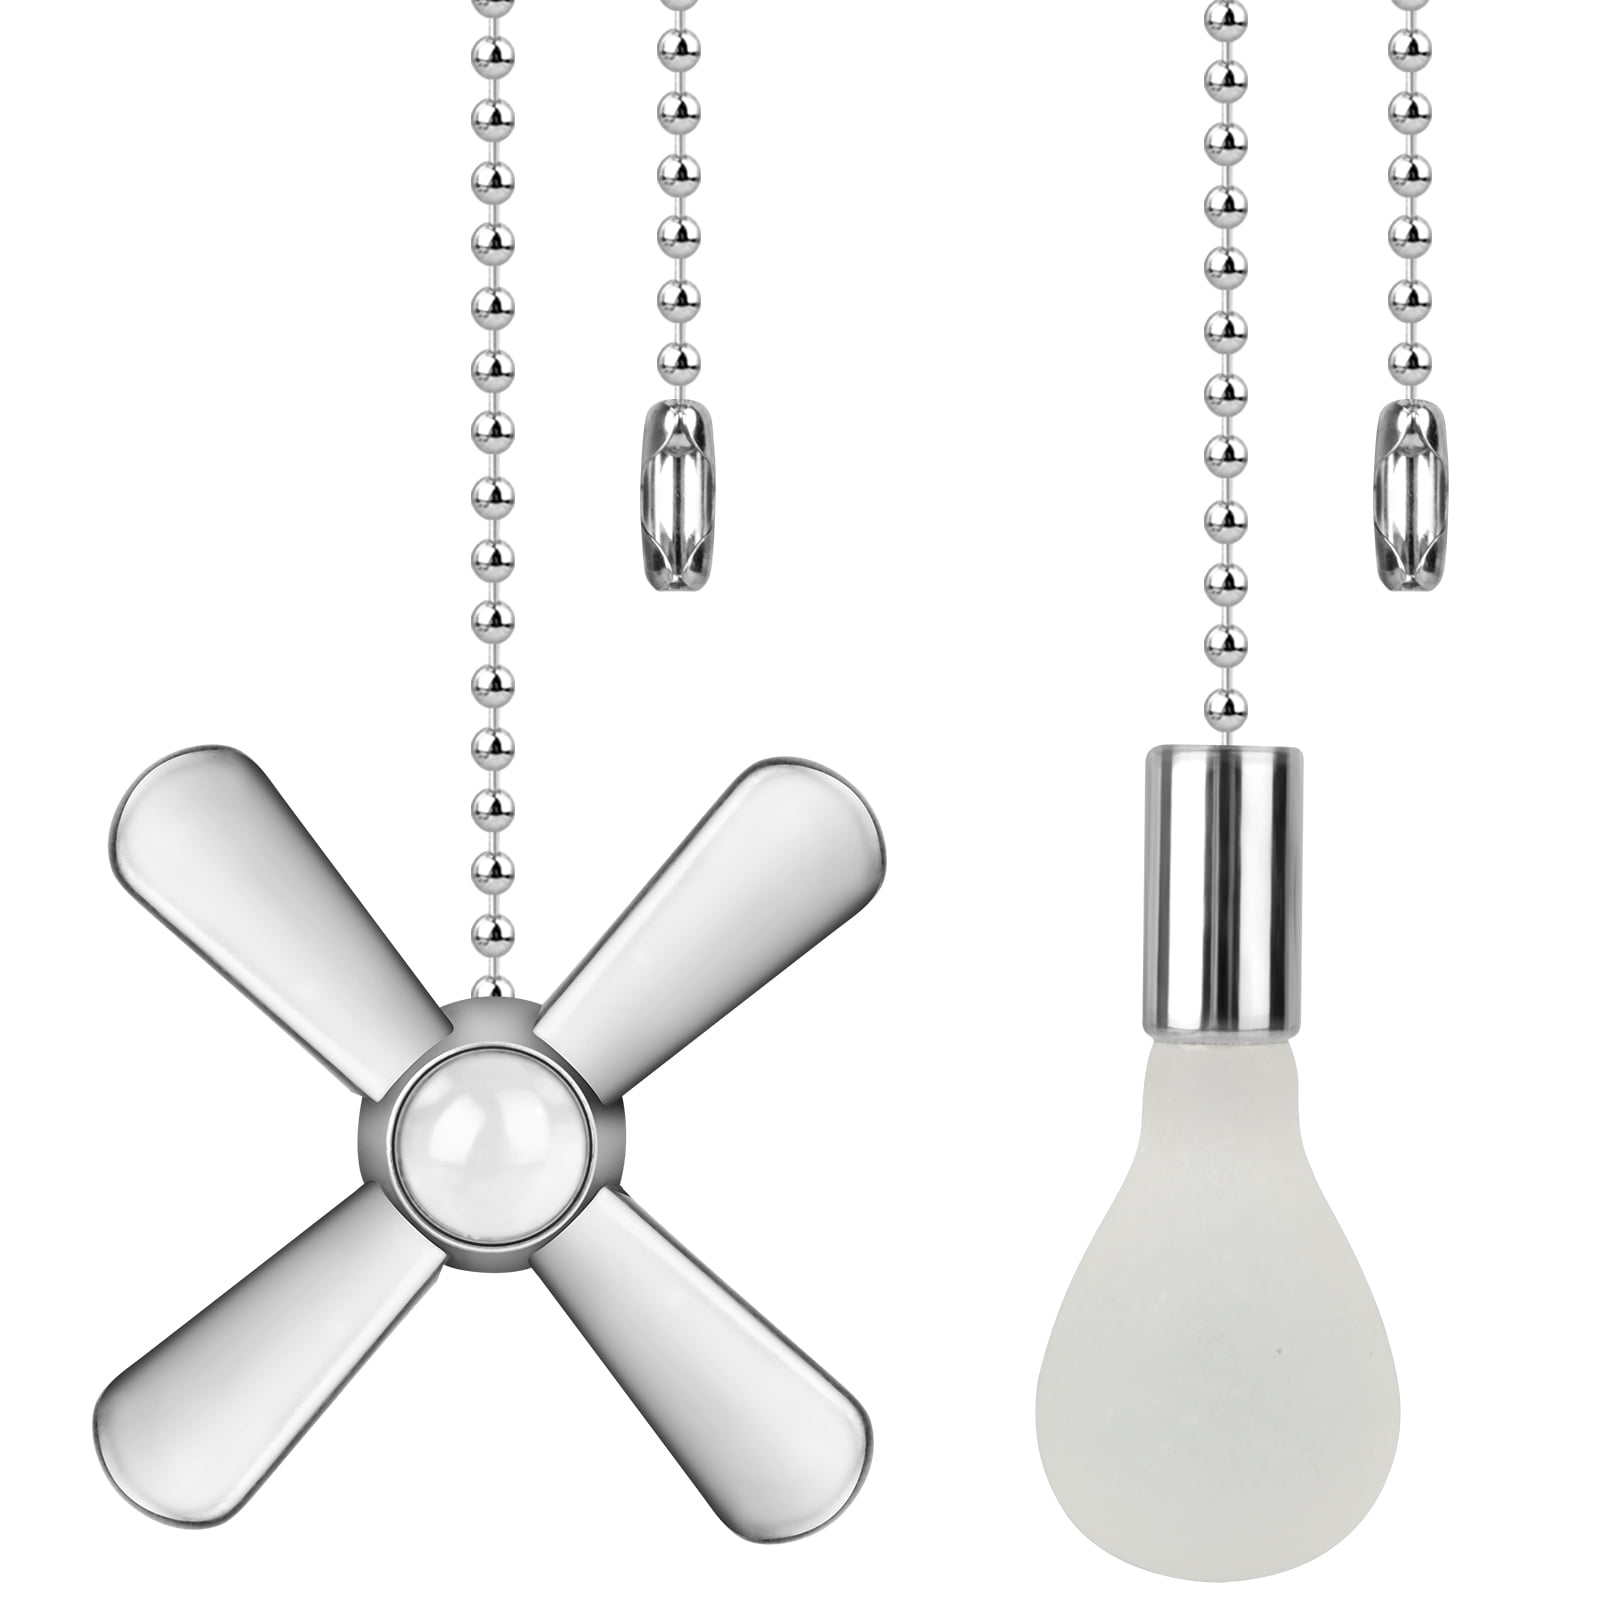 White with Multicolored Specked Glass Cross Ceiling Fan Pull Chain Pair 